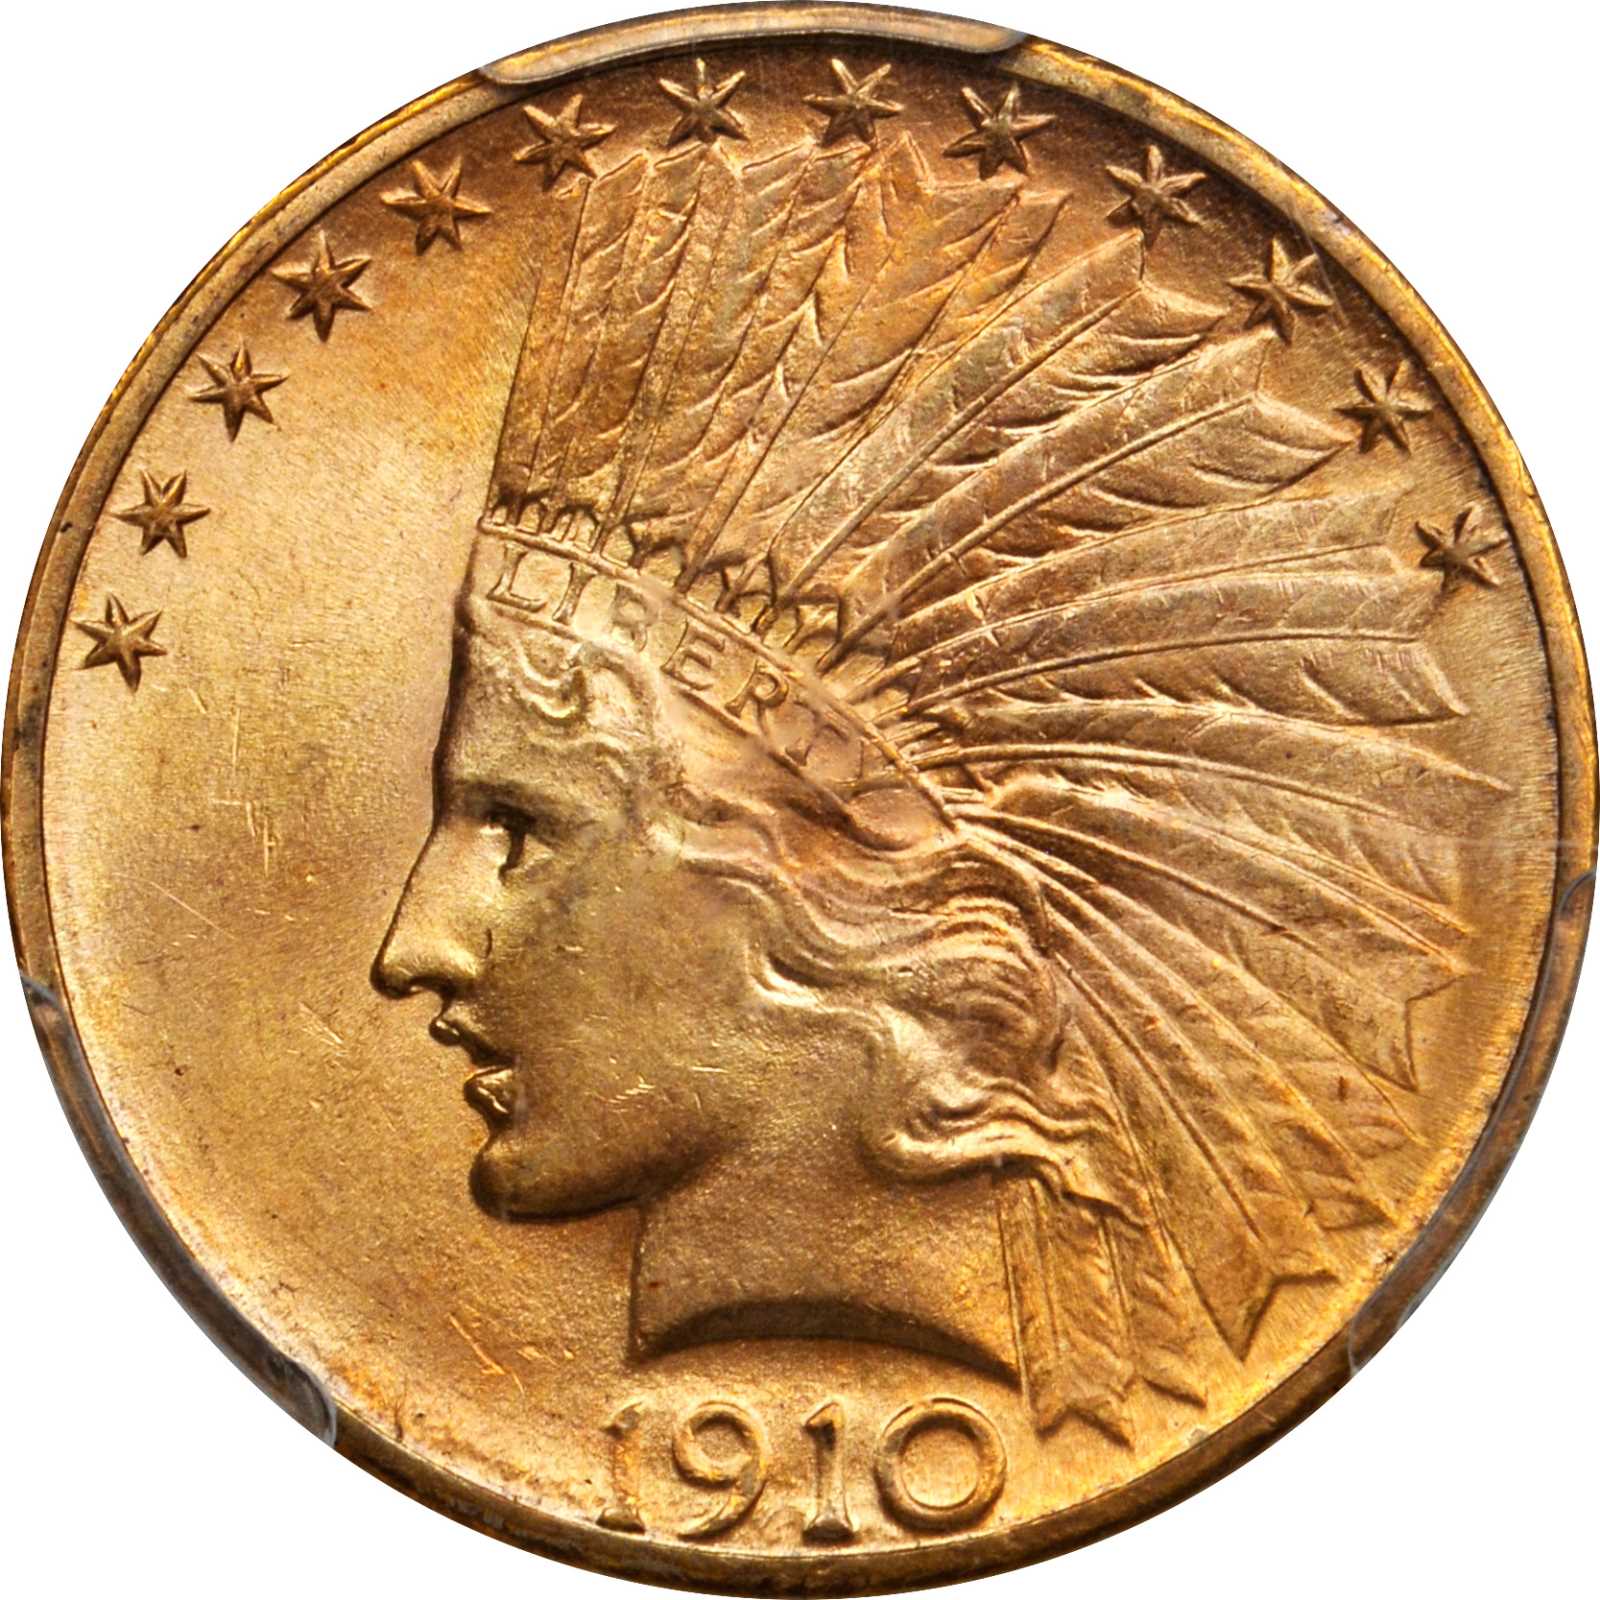 At Auction: 1910 2 1/2 Dollar Gold Indian Coin